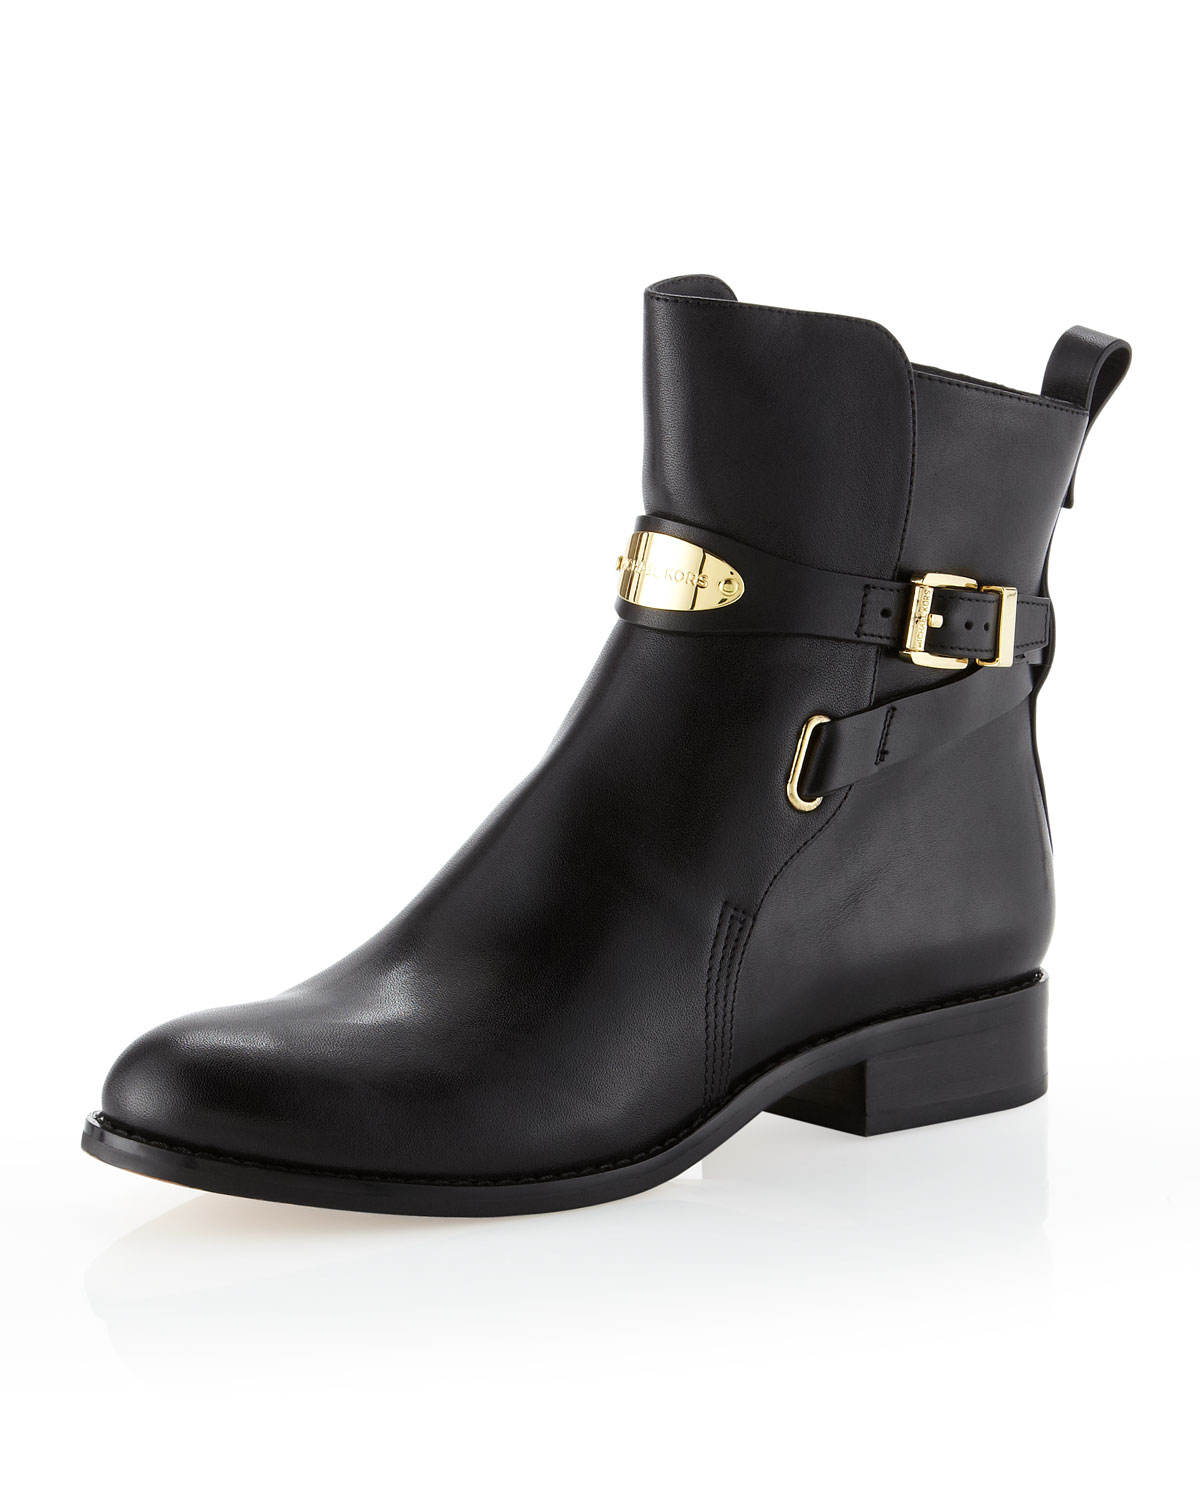 Michael Michael Kors Arley Leather Ankle Boot in Black